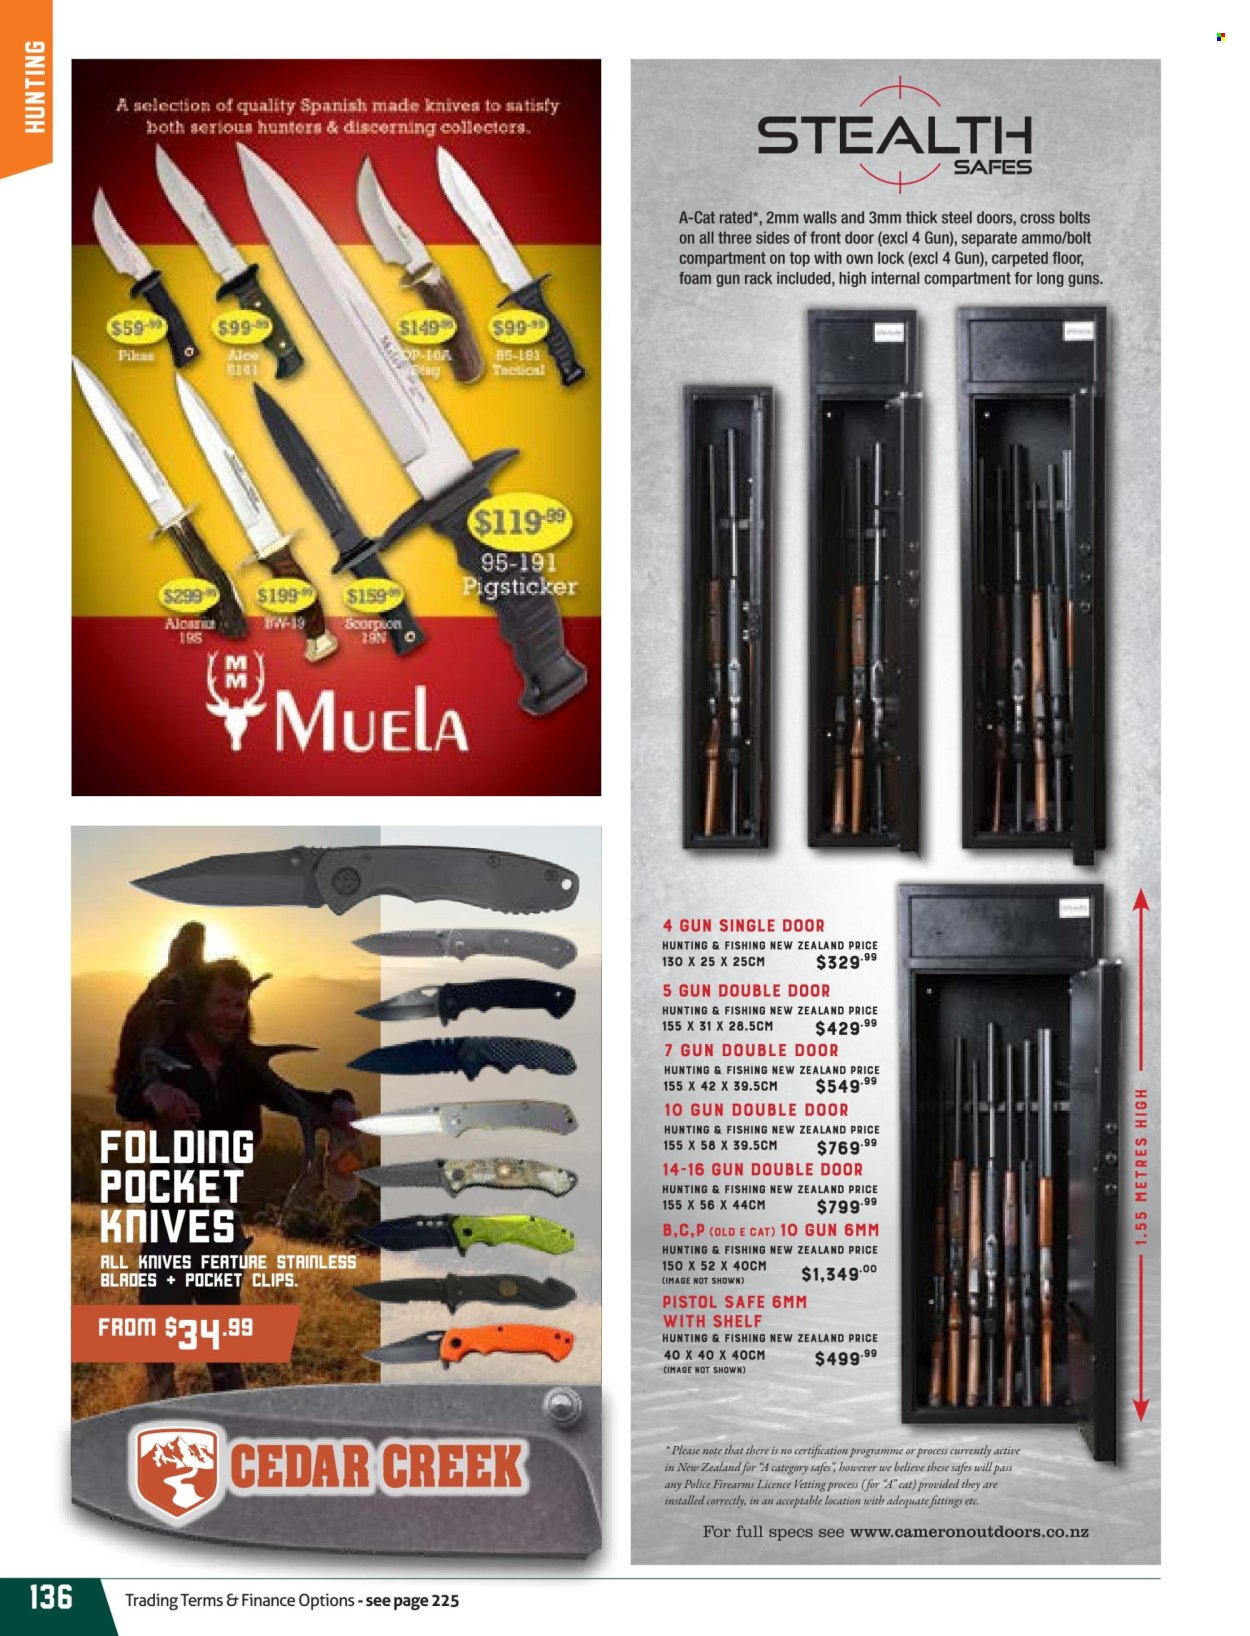 thumbnail - Hunting & Fishing mailer - Sales products - knife, pistol, ammo. Page 136.